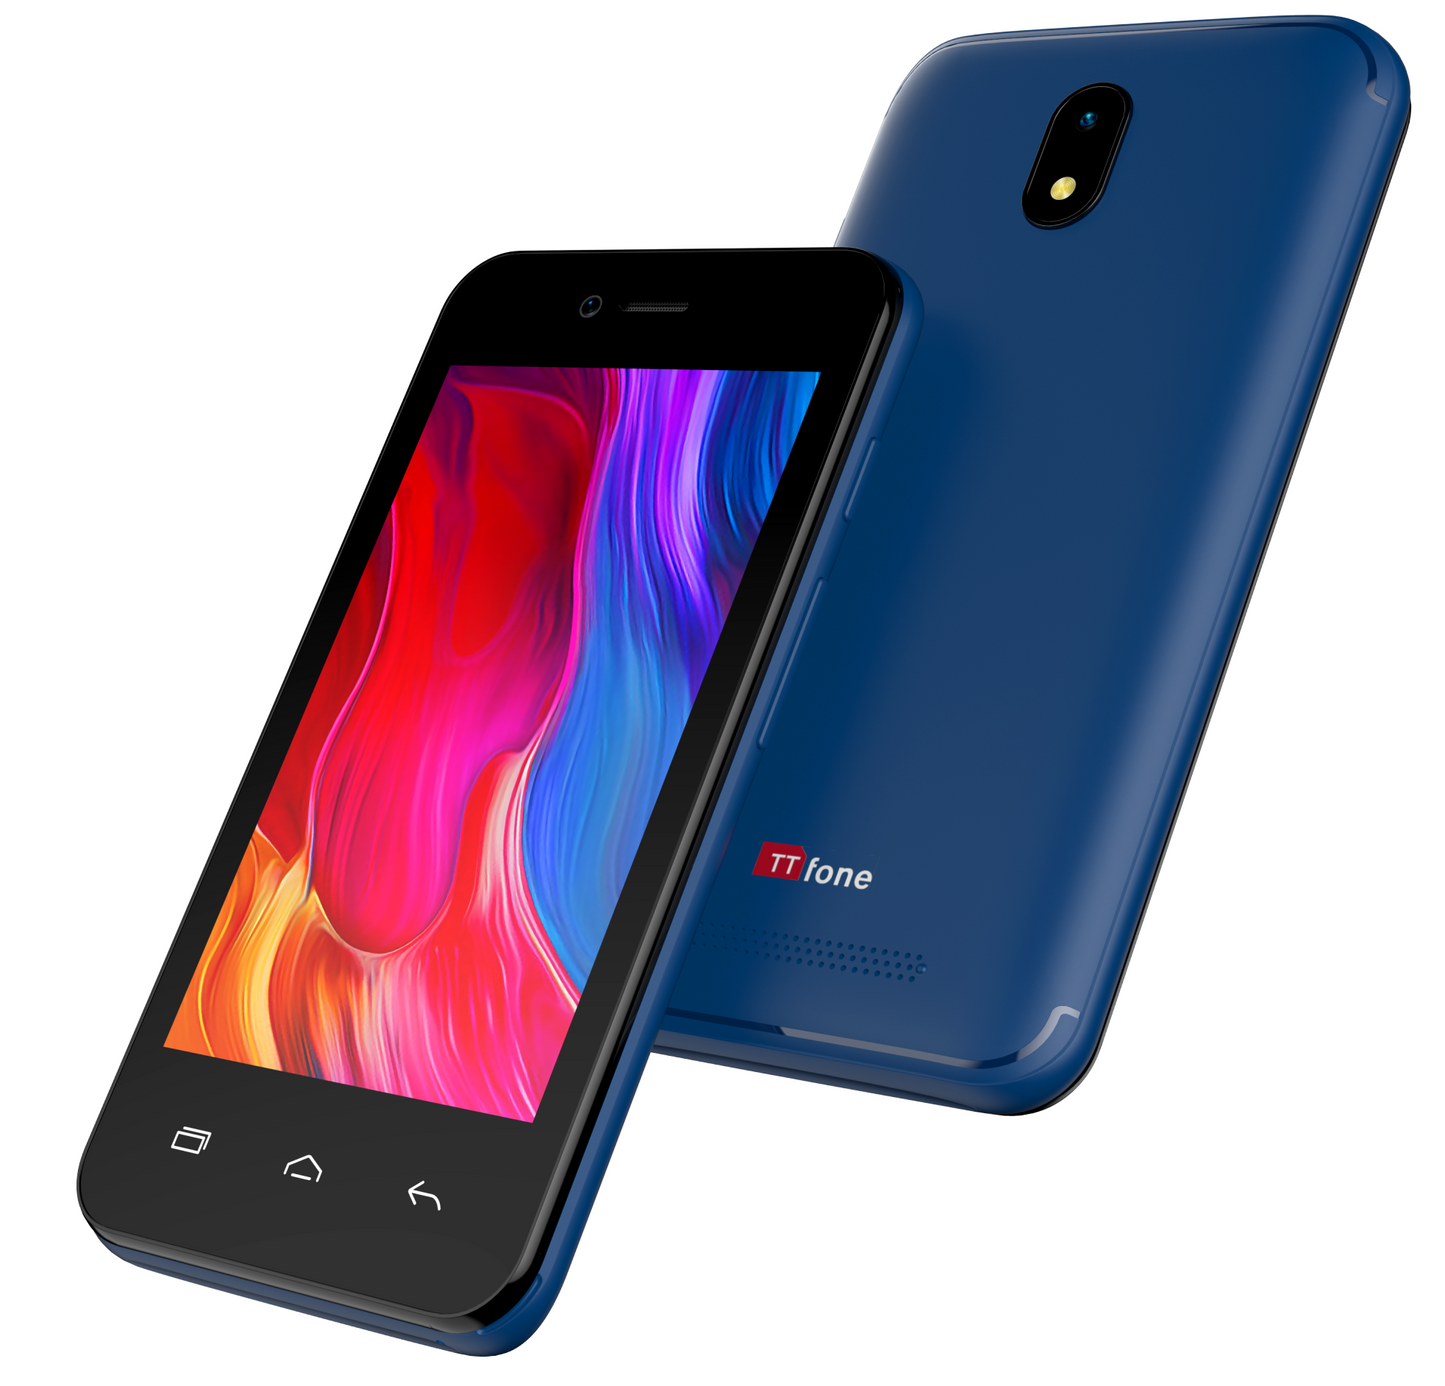 TTfone Blue TT20 Dual SIM - Warehouse Deals with USB Cable and O2 Pay As You Go Sim Card